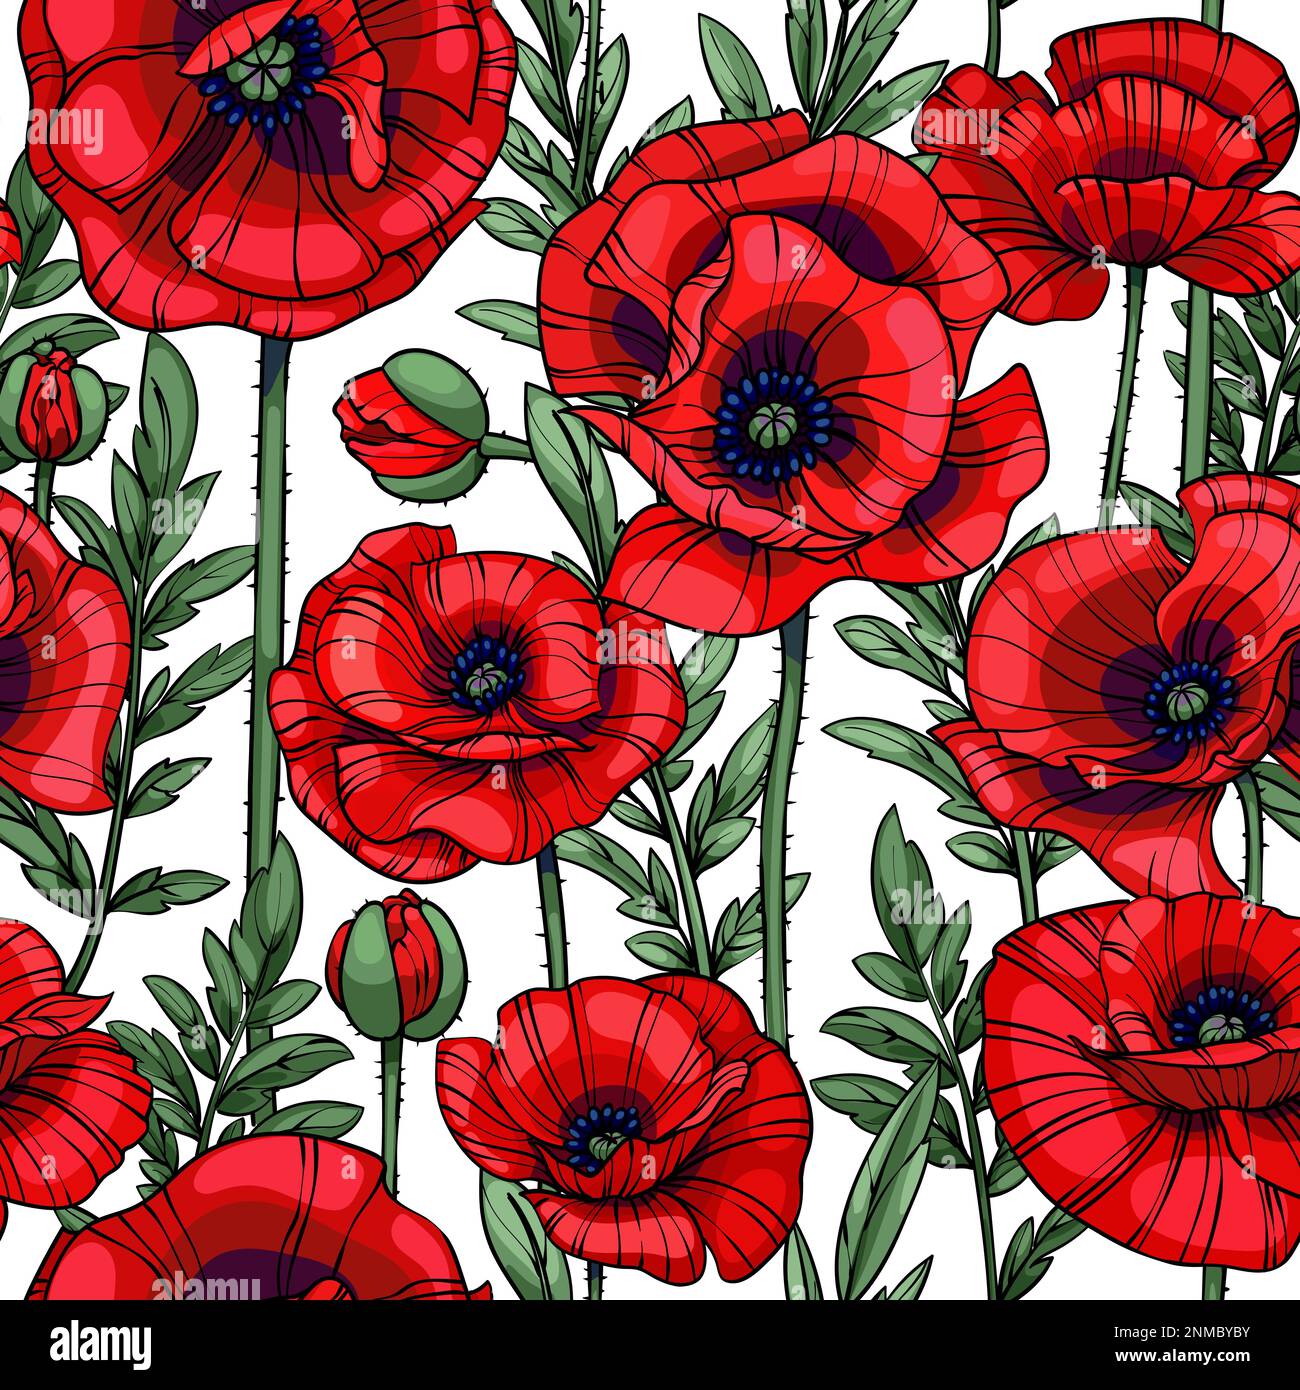 Poppies Exquisite Floral Illustration Vibrant Red Poppy Flowers On